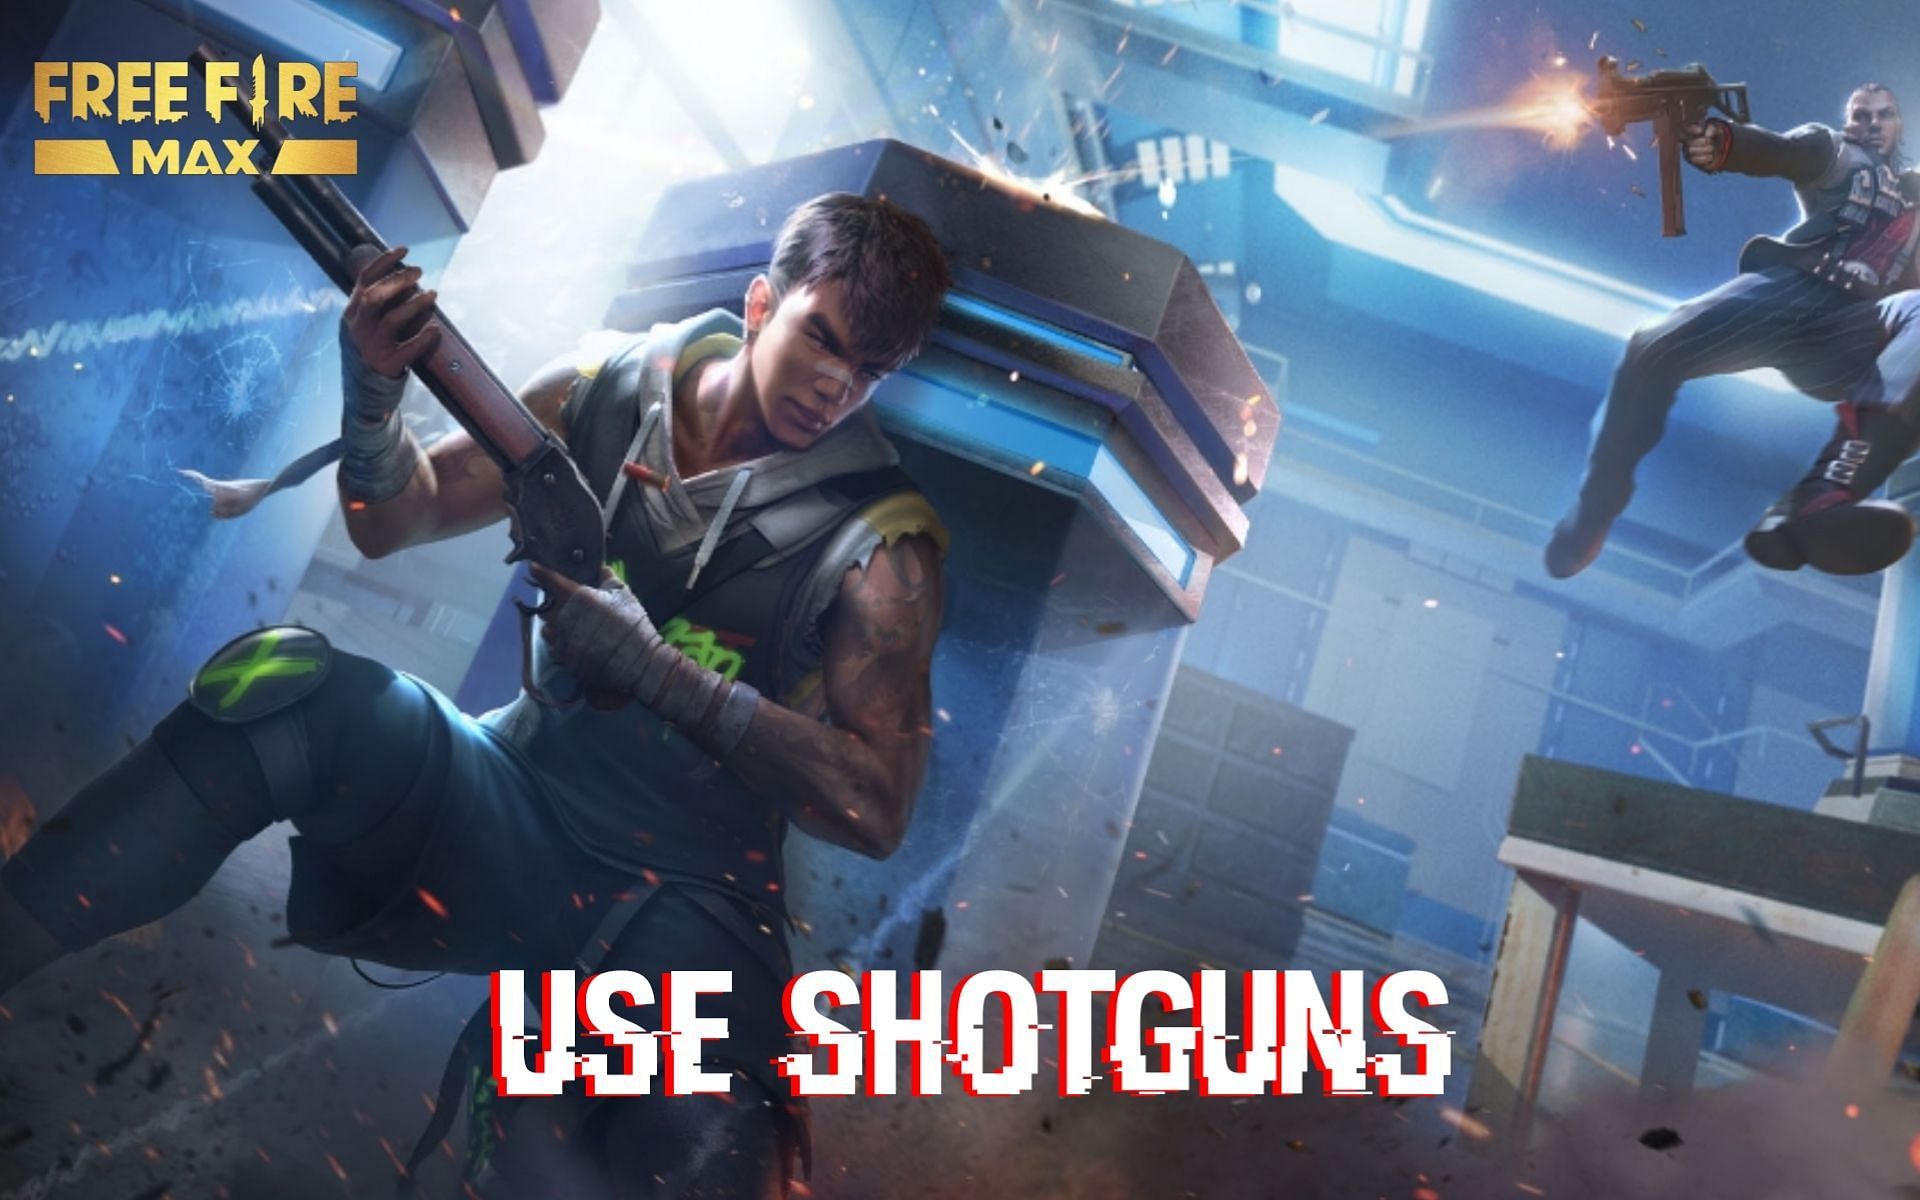 Shotguns deliver some serious firepower in Free Fire MAX (Image via Sportskeeda)